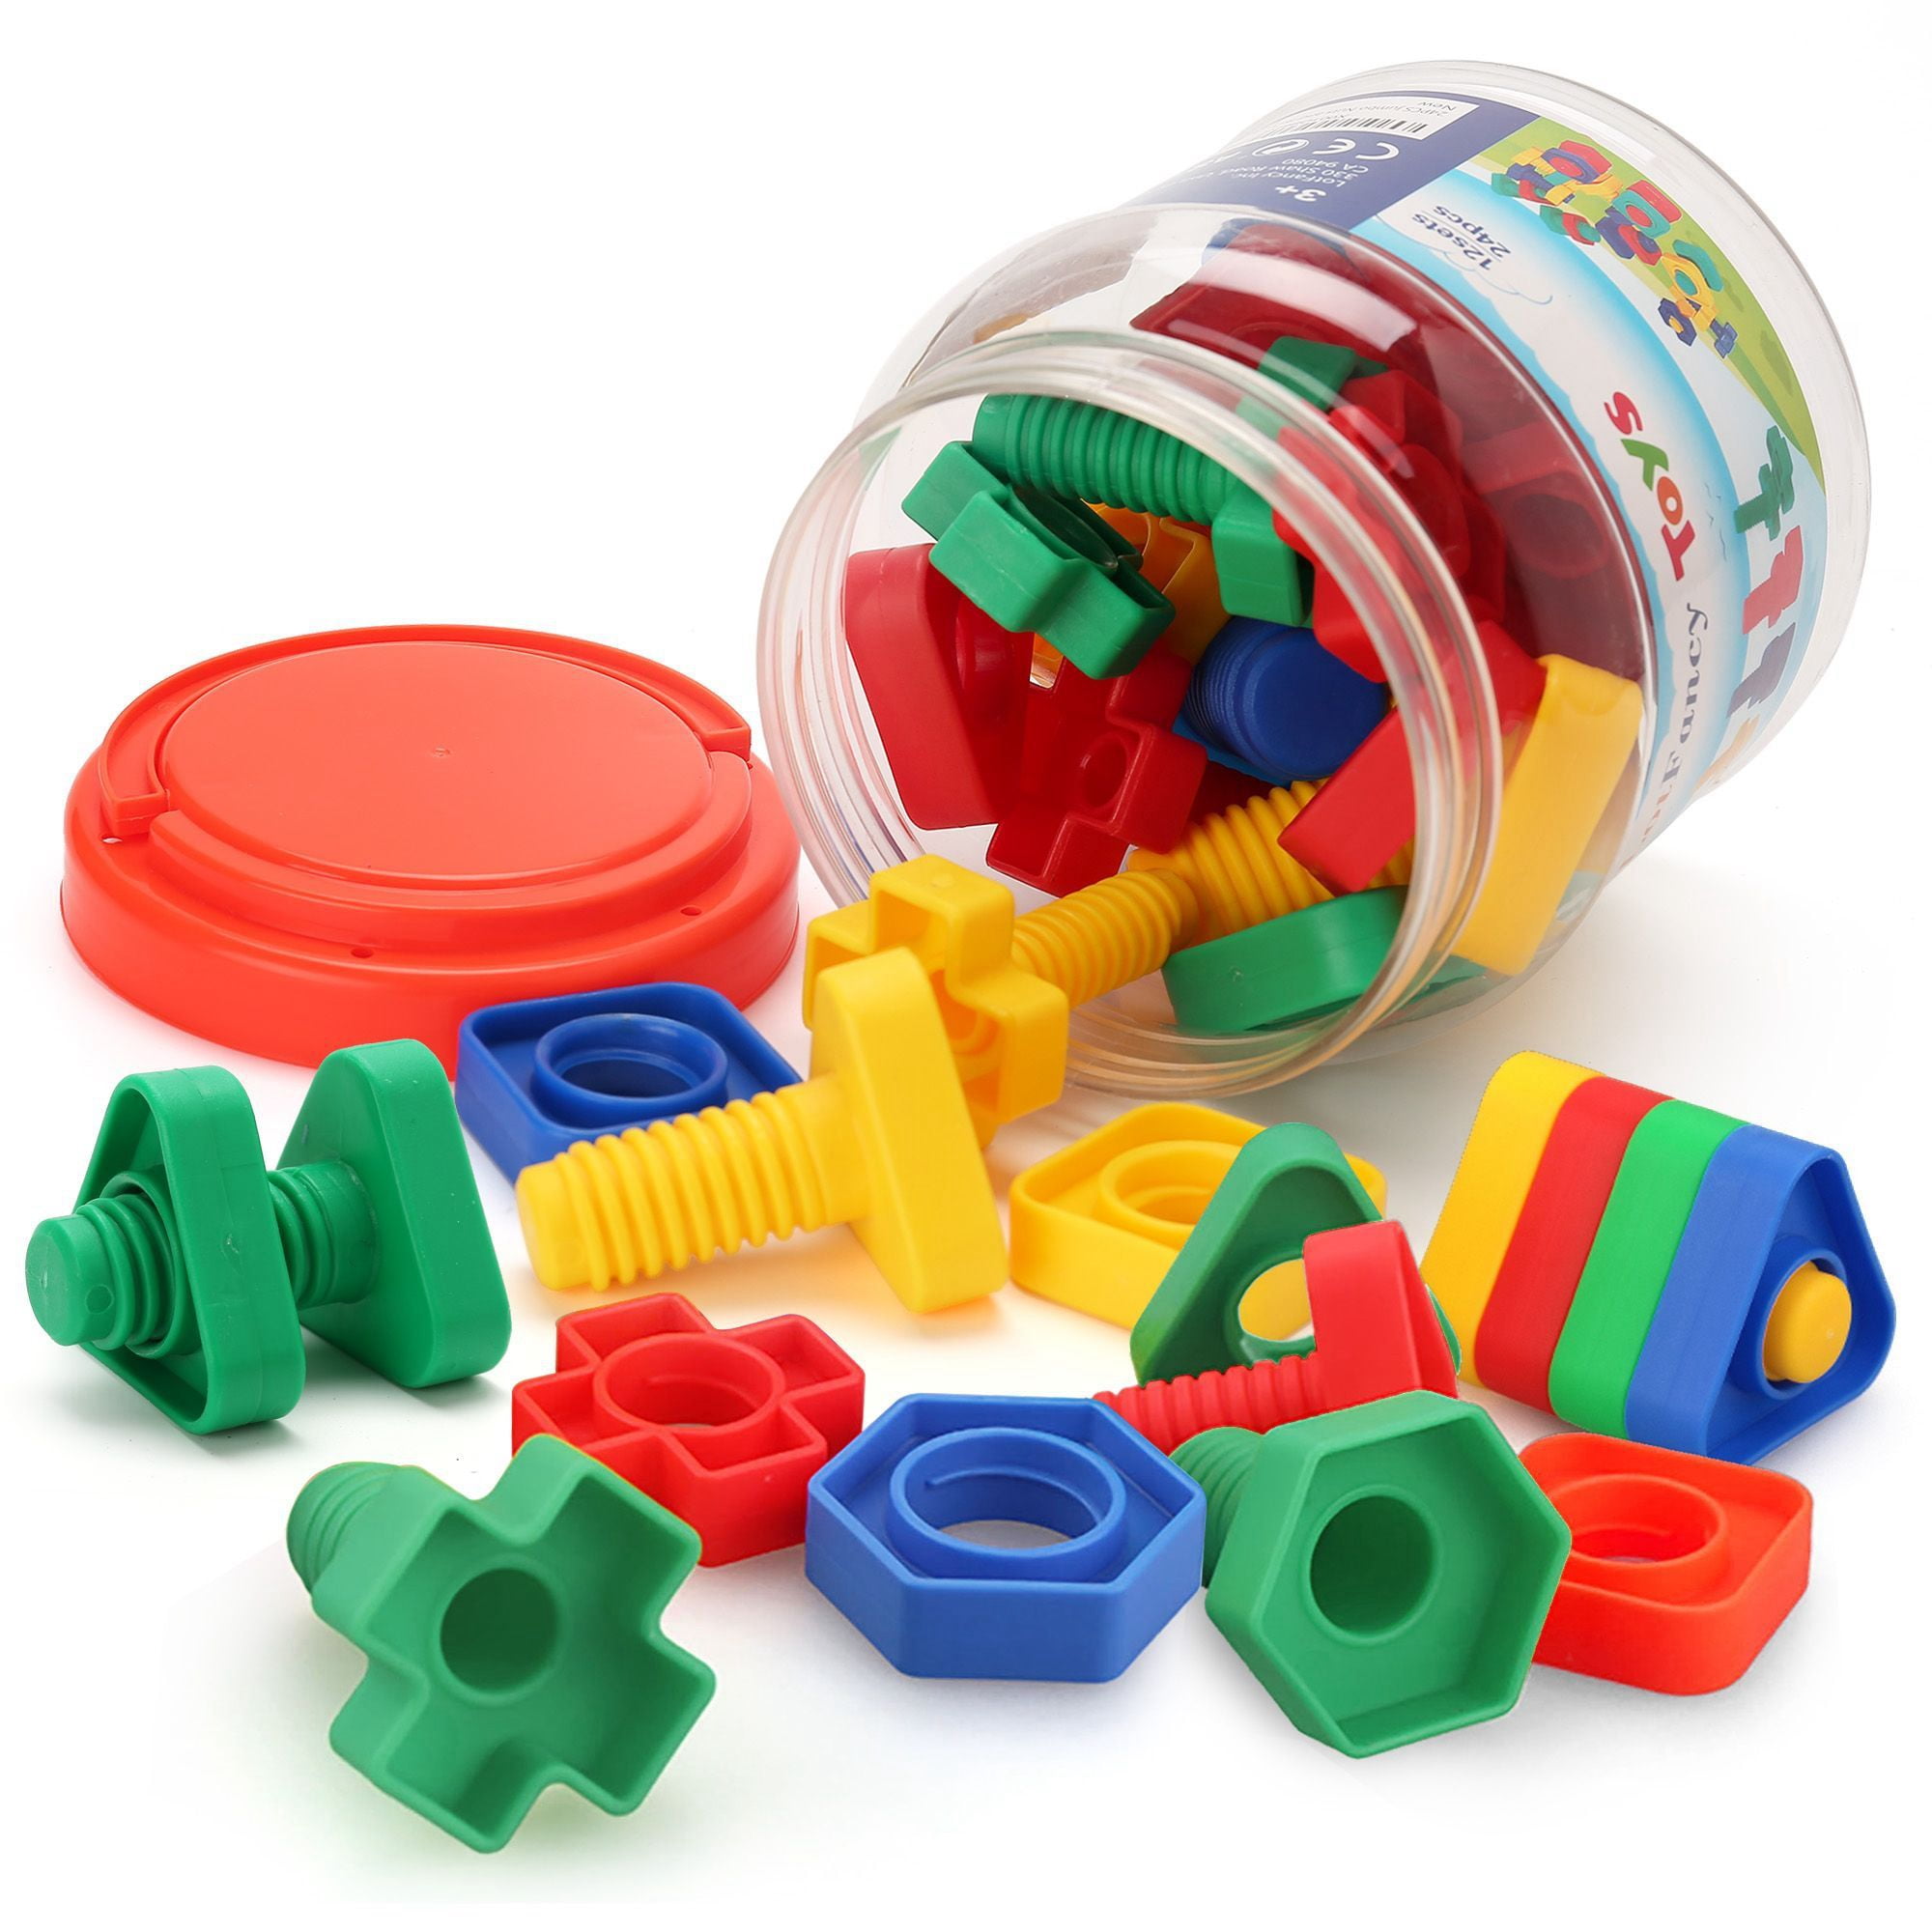 Nuts Bolts Toy TOYMYTOY Building Blocks Sets Educational Enlightenment Toys 